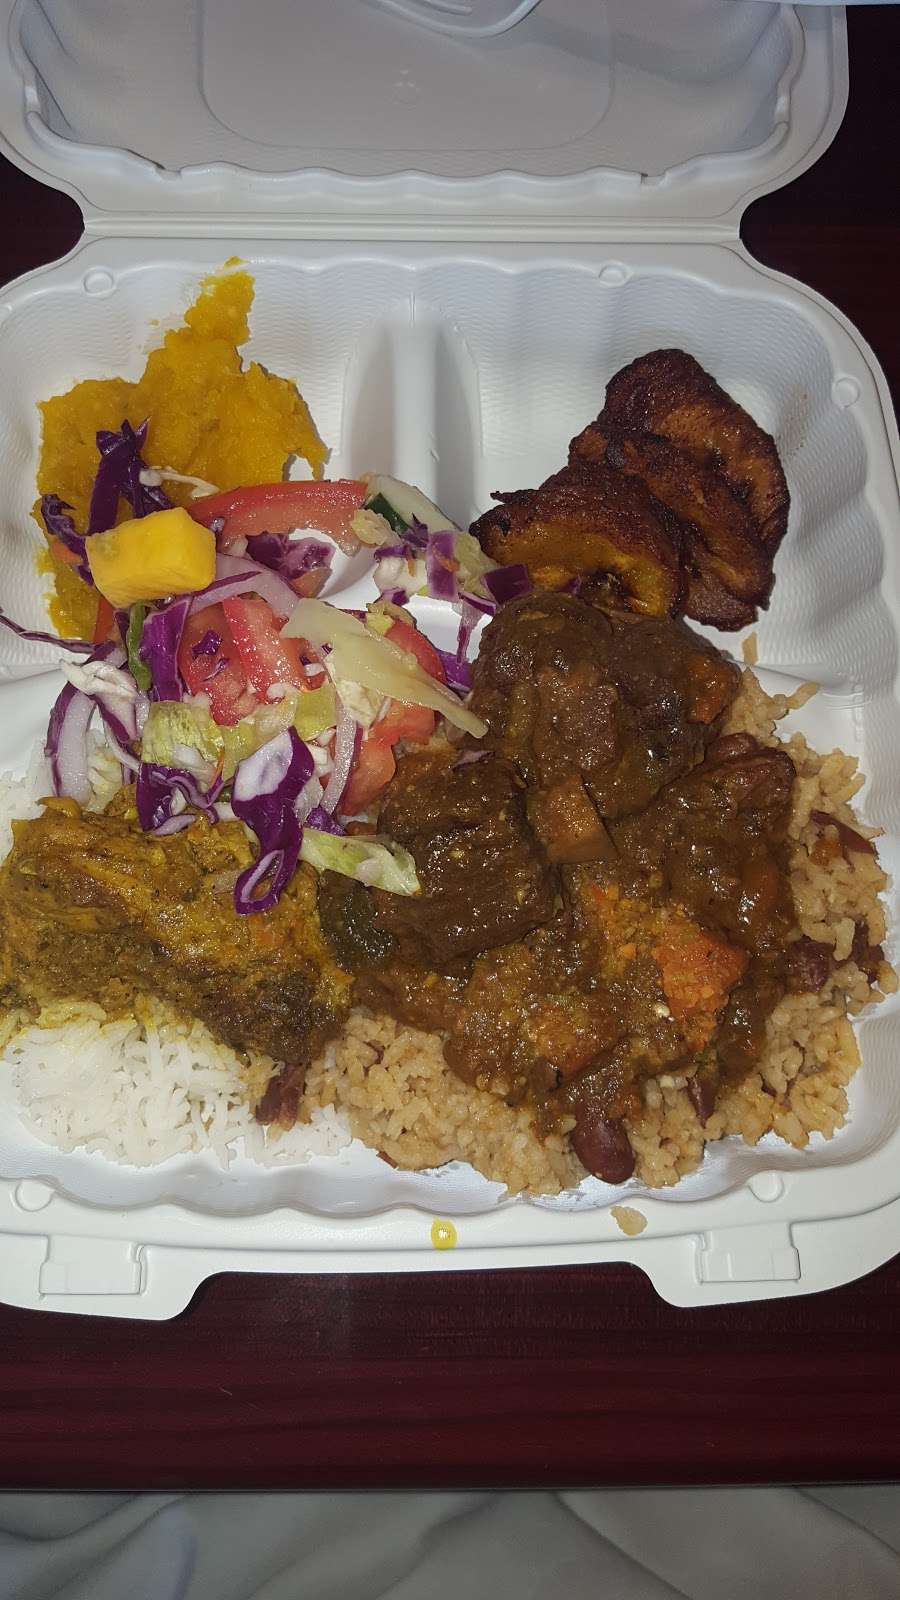 The Caribbean Flavor | 11524 Middlebrook Road, Germantown, MD 20876 | Phone: (240) 477-8616